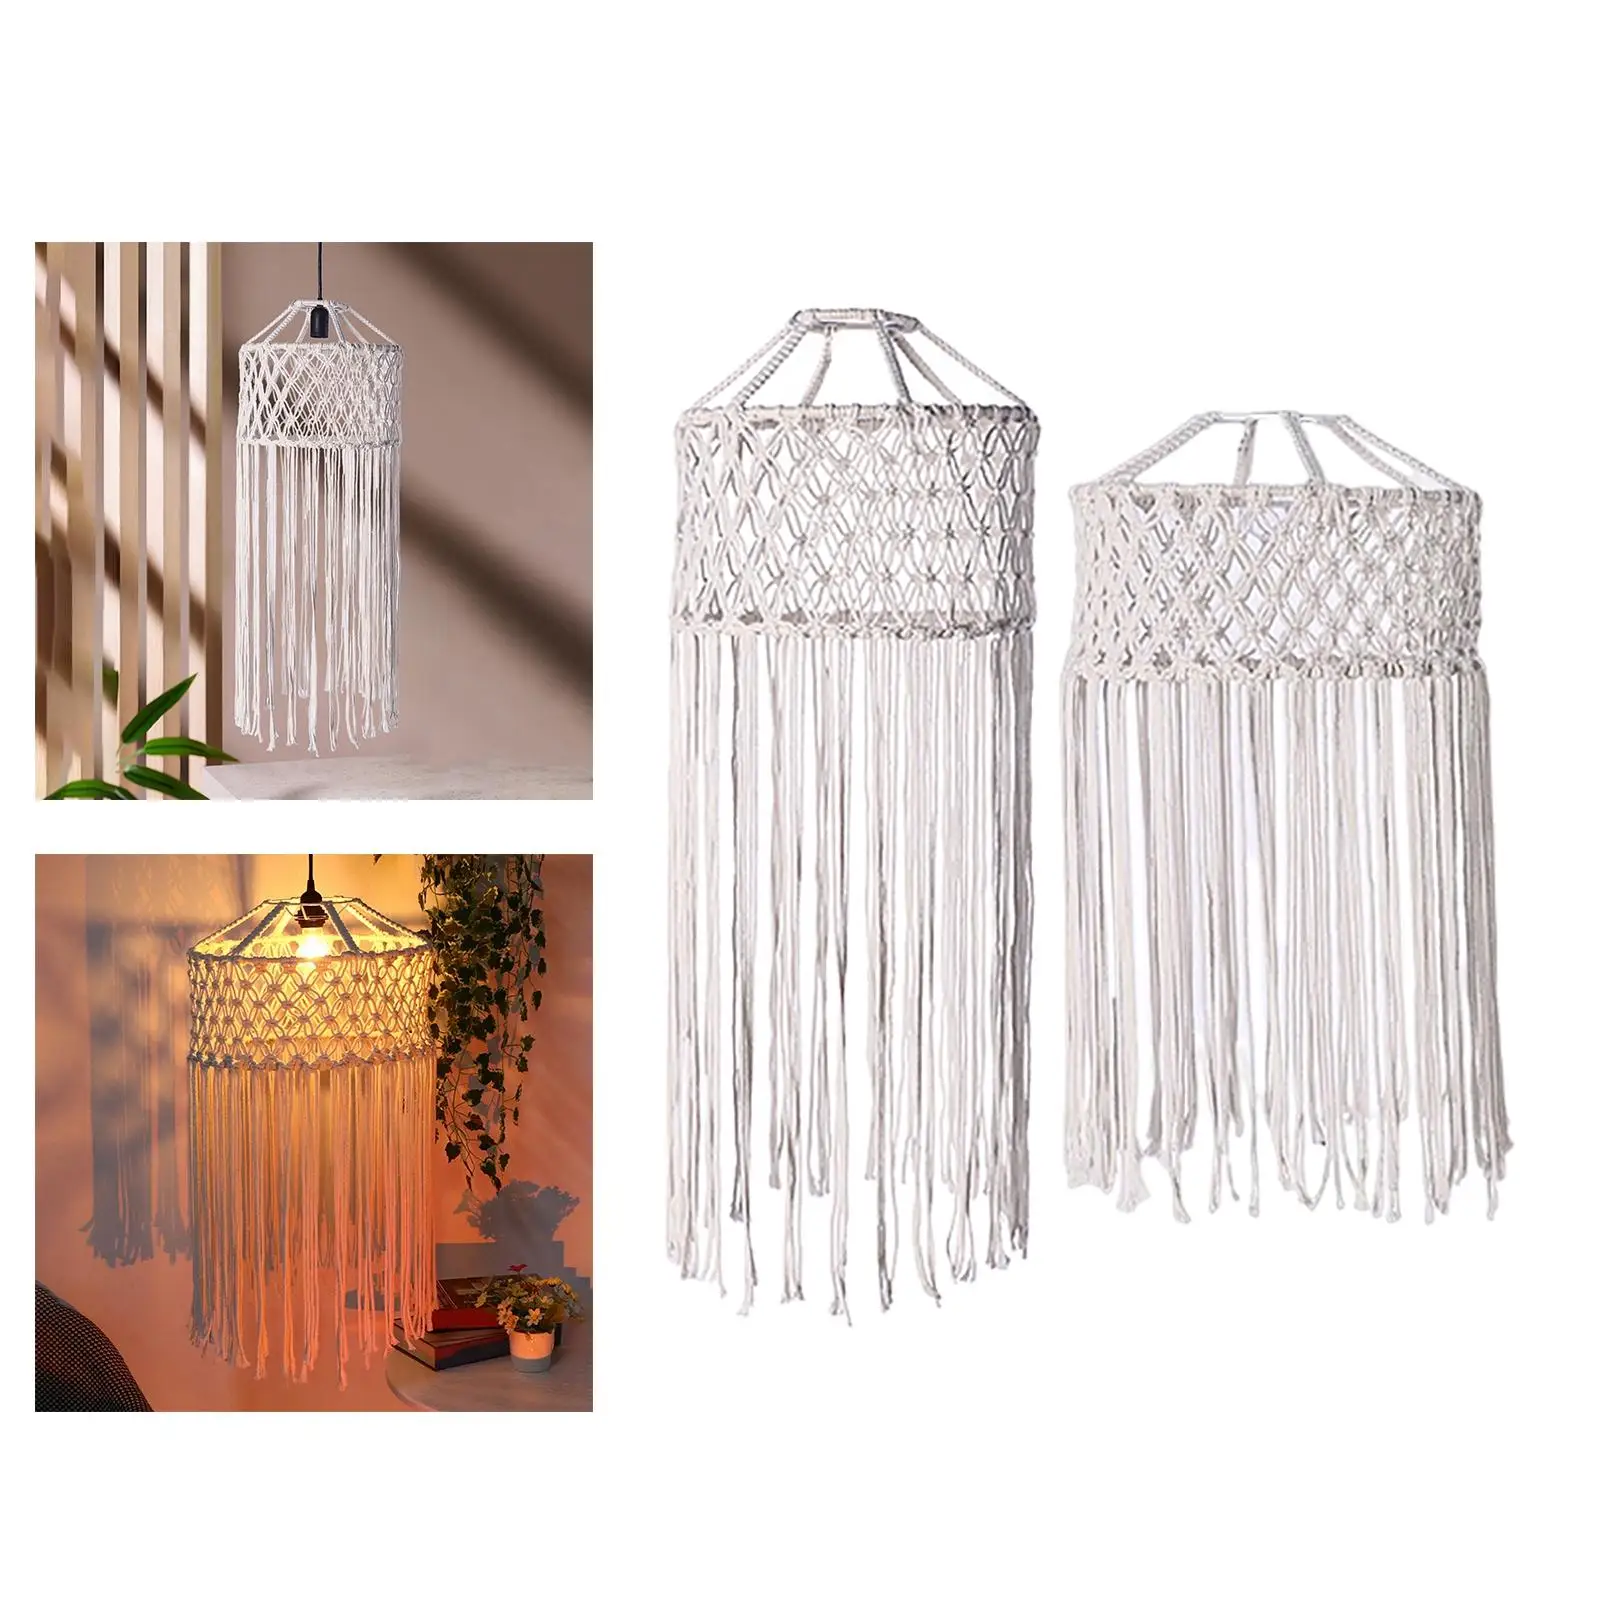 Macrame Lamp Shade Dorm Room Creative Woven Lampshade Chandelier Lamp Cover